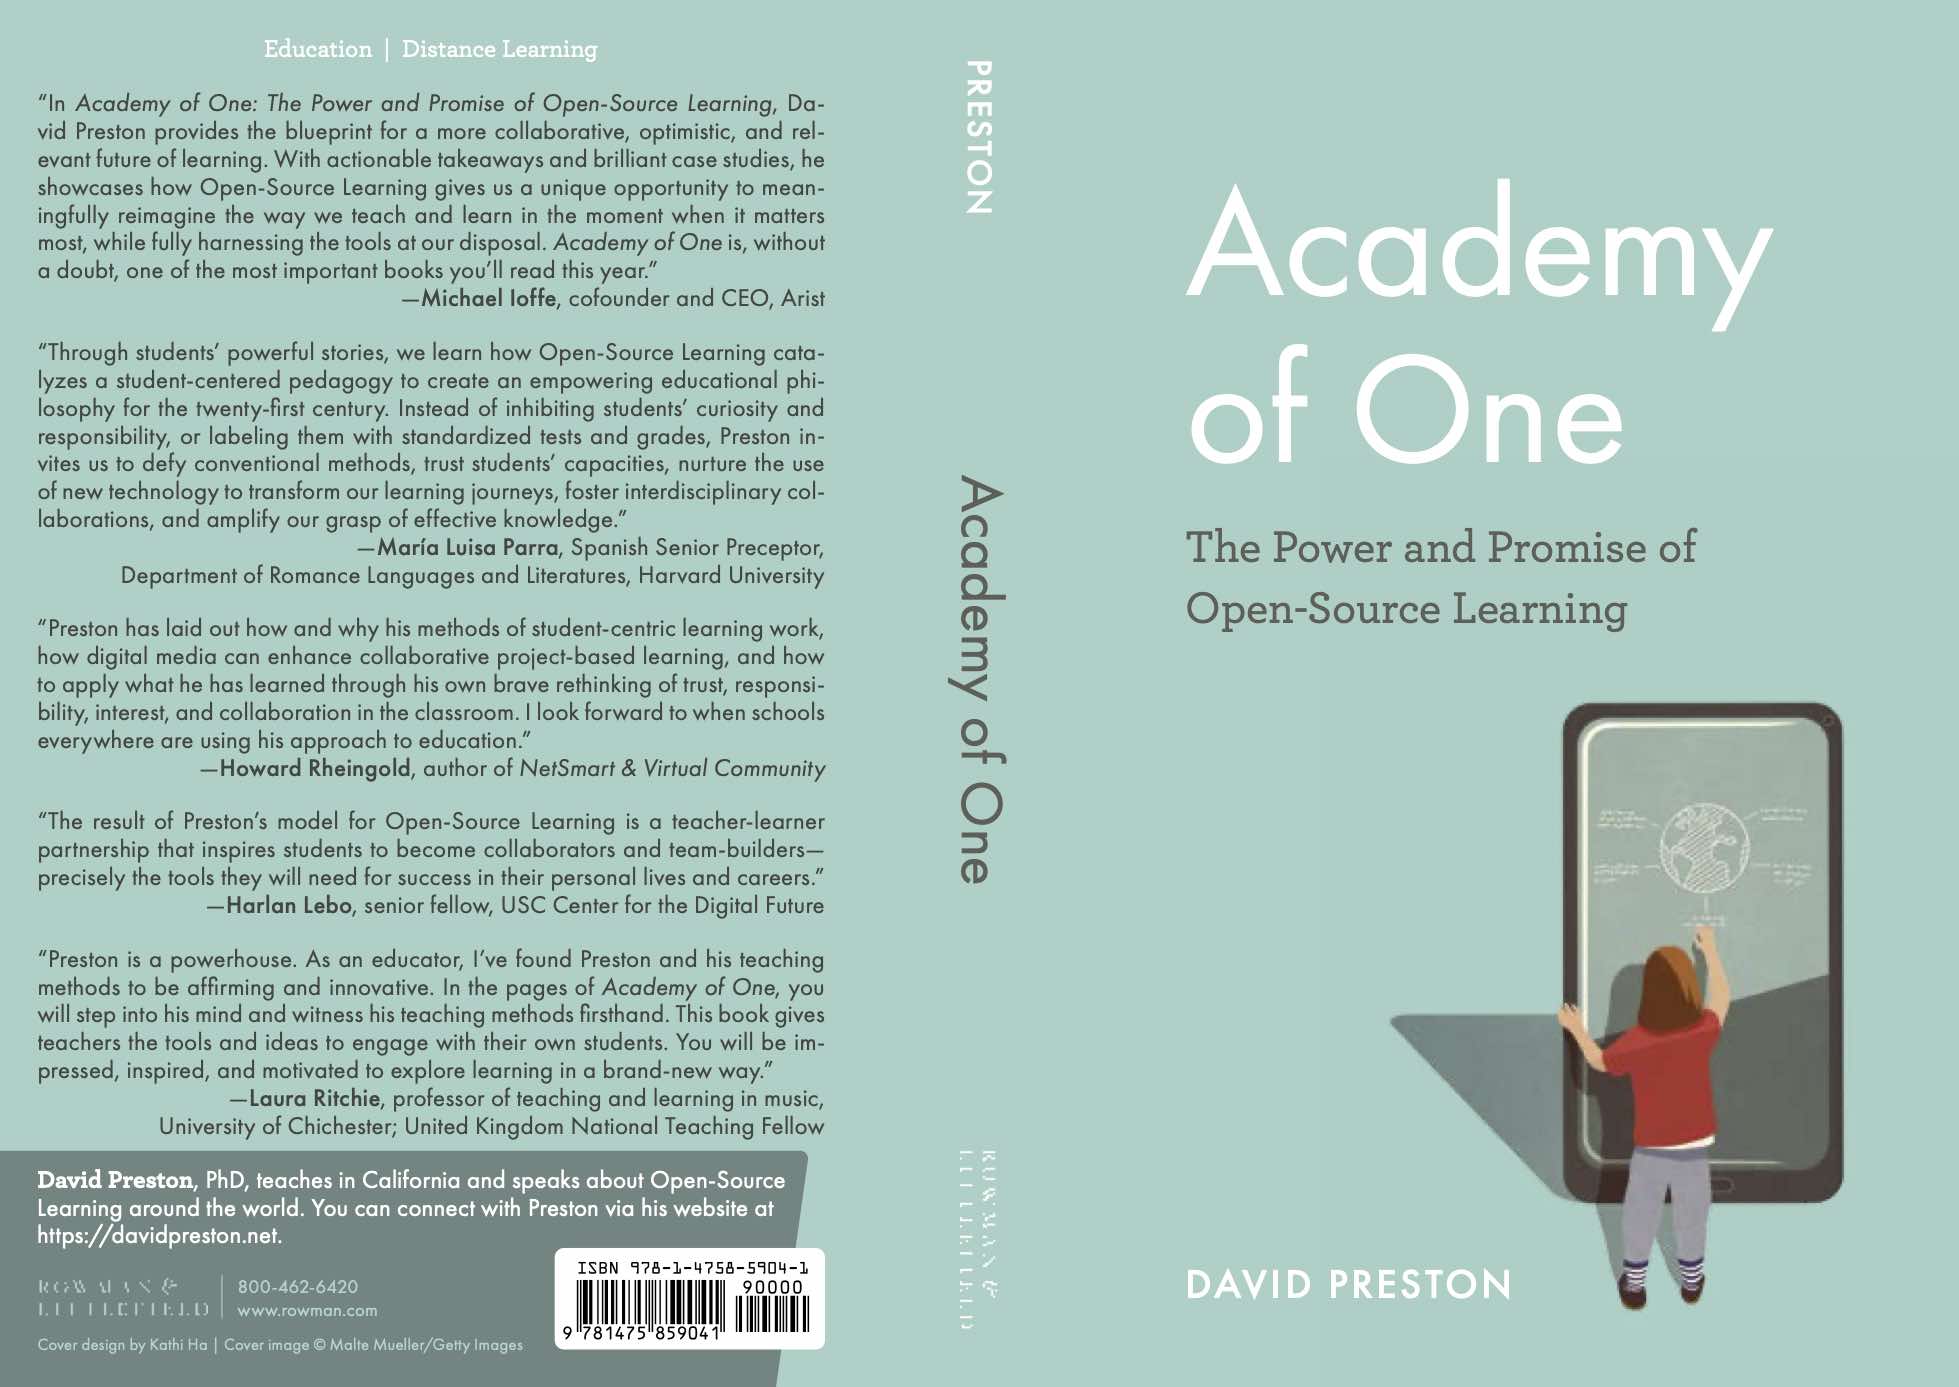 ACADEMY OF ONE is available for purchase